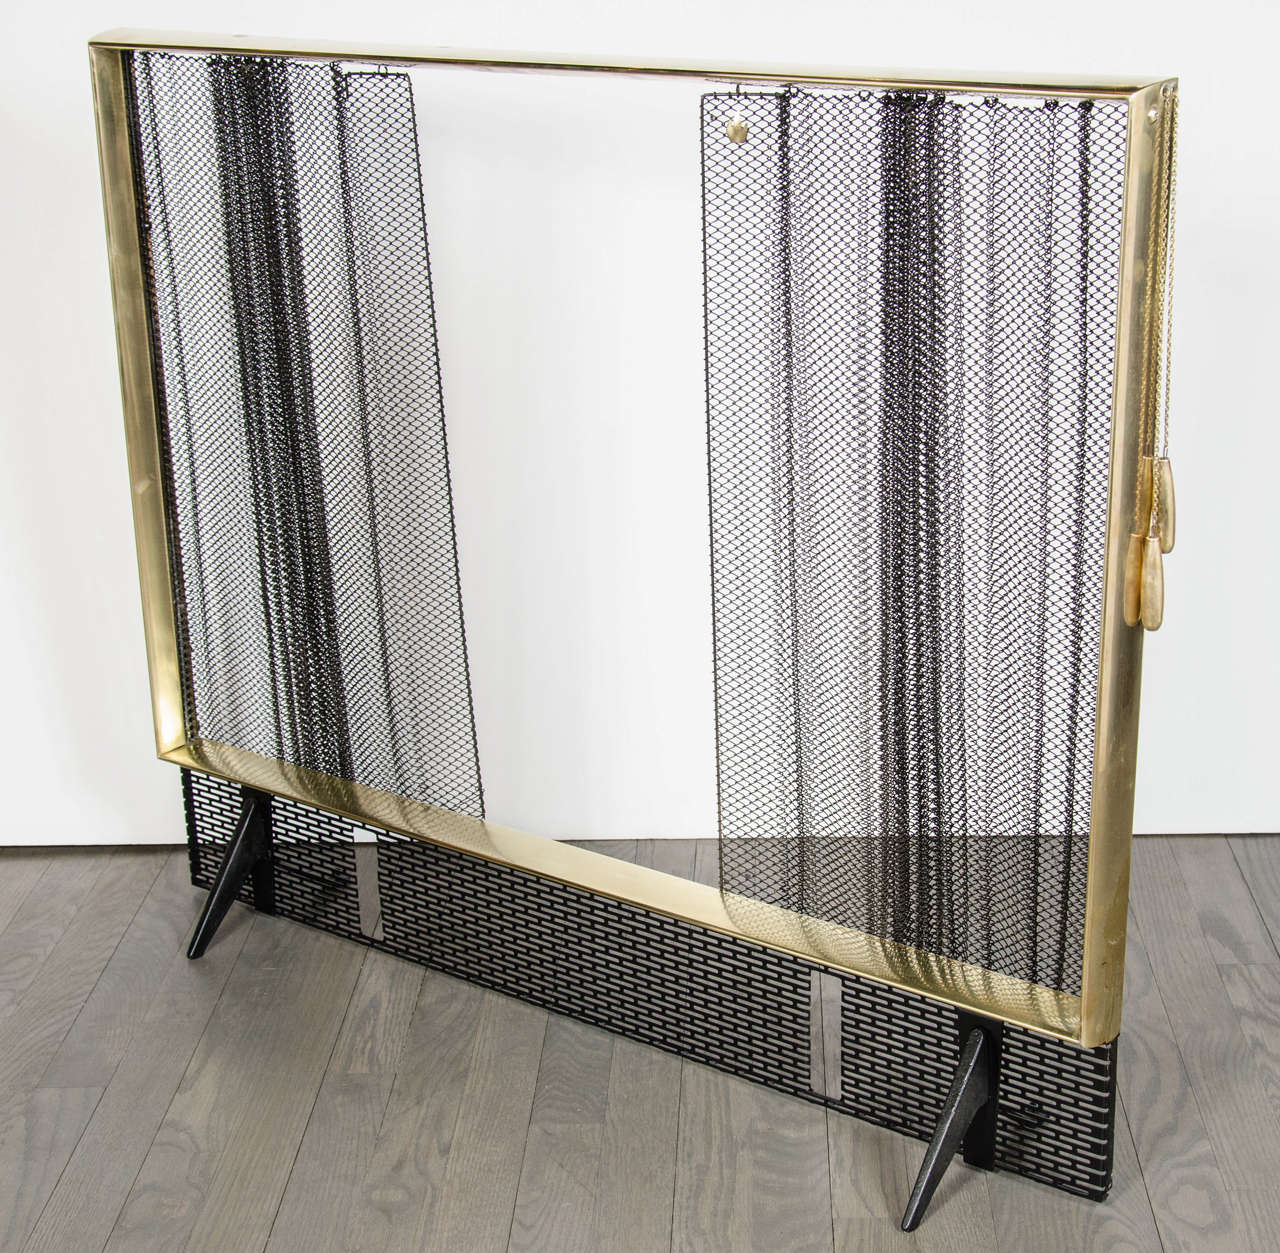 This exceptional Art Deco Fire Screen by Donald Deskey for Bennett features a center opening chain operated mesh curtain on a polished brass frame and a spark arrester with andiron slots.
Matching Andirons and fire tools available. Contact dealer